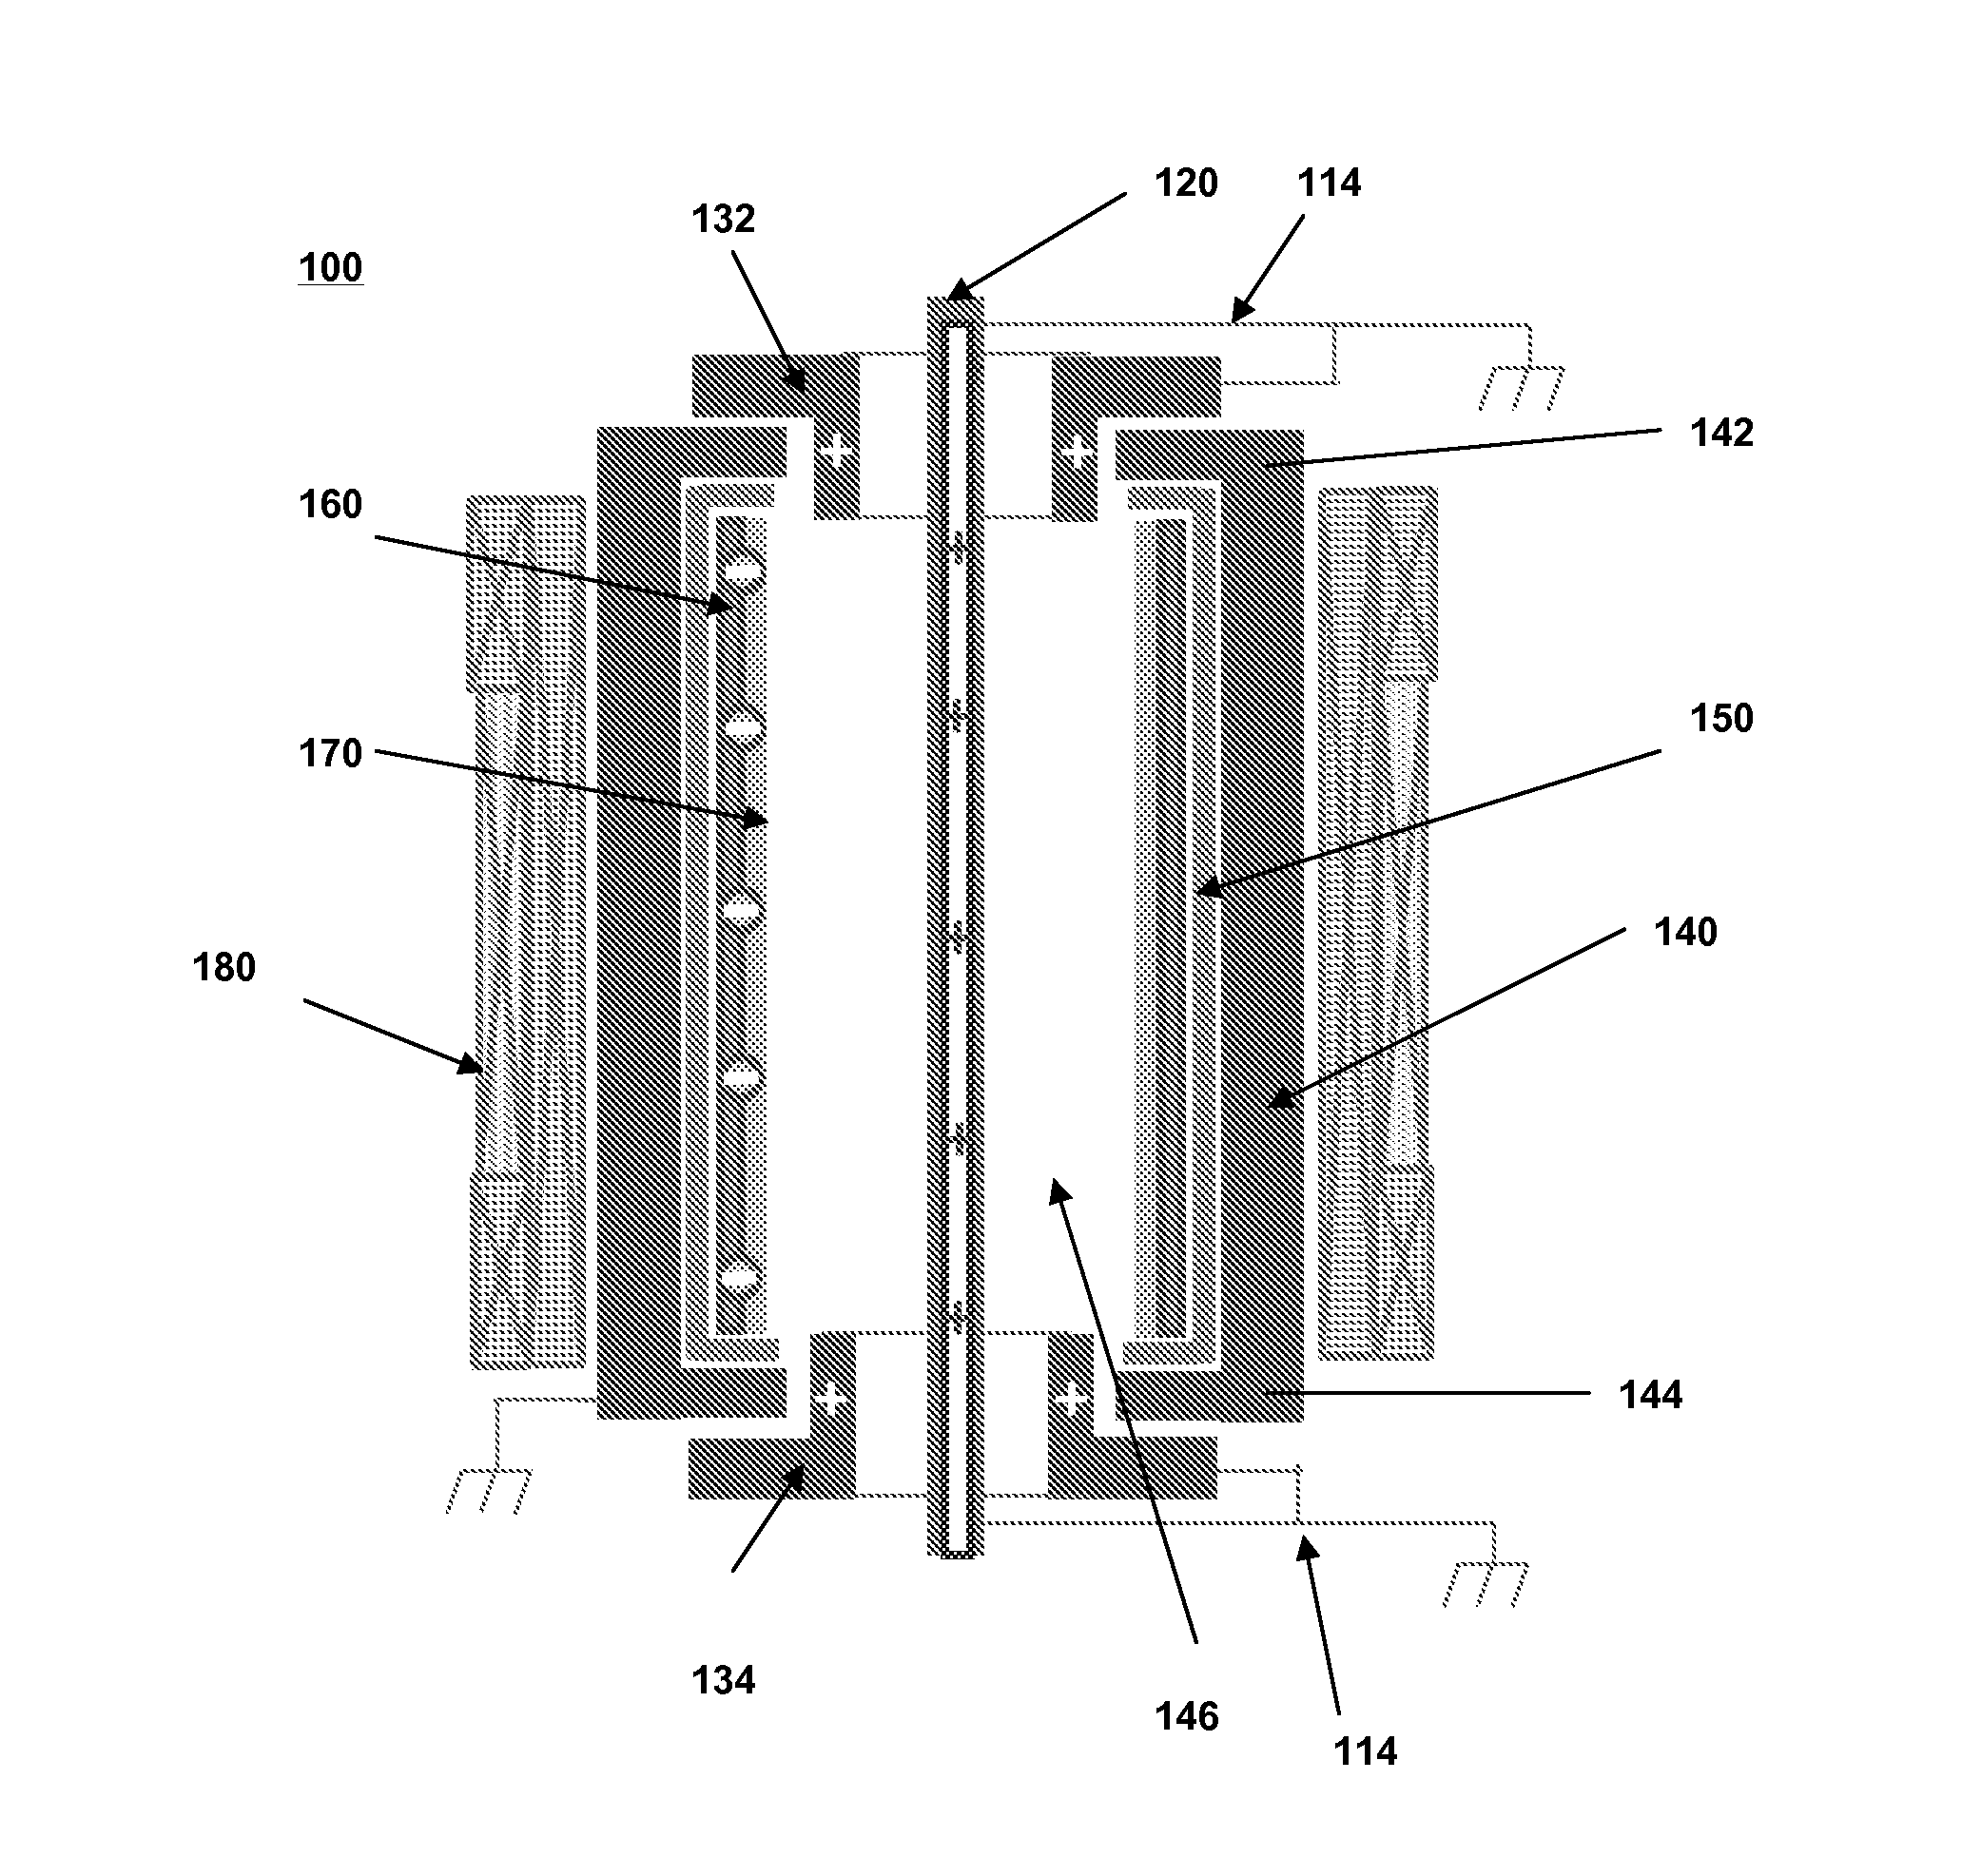 Inverted cylindrical magnetron (ICM) system and methods of use